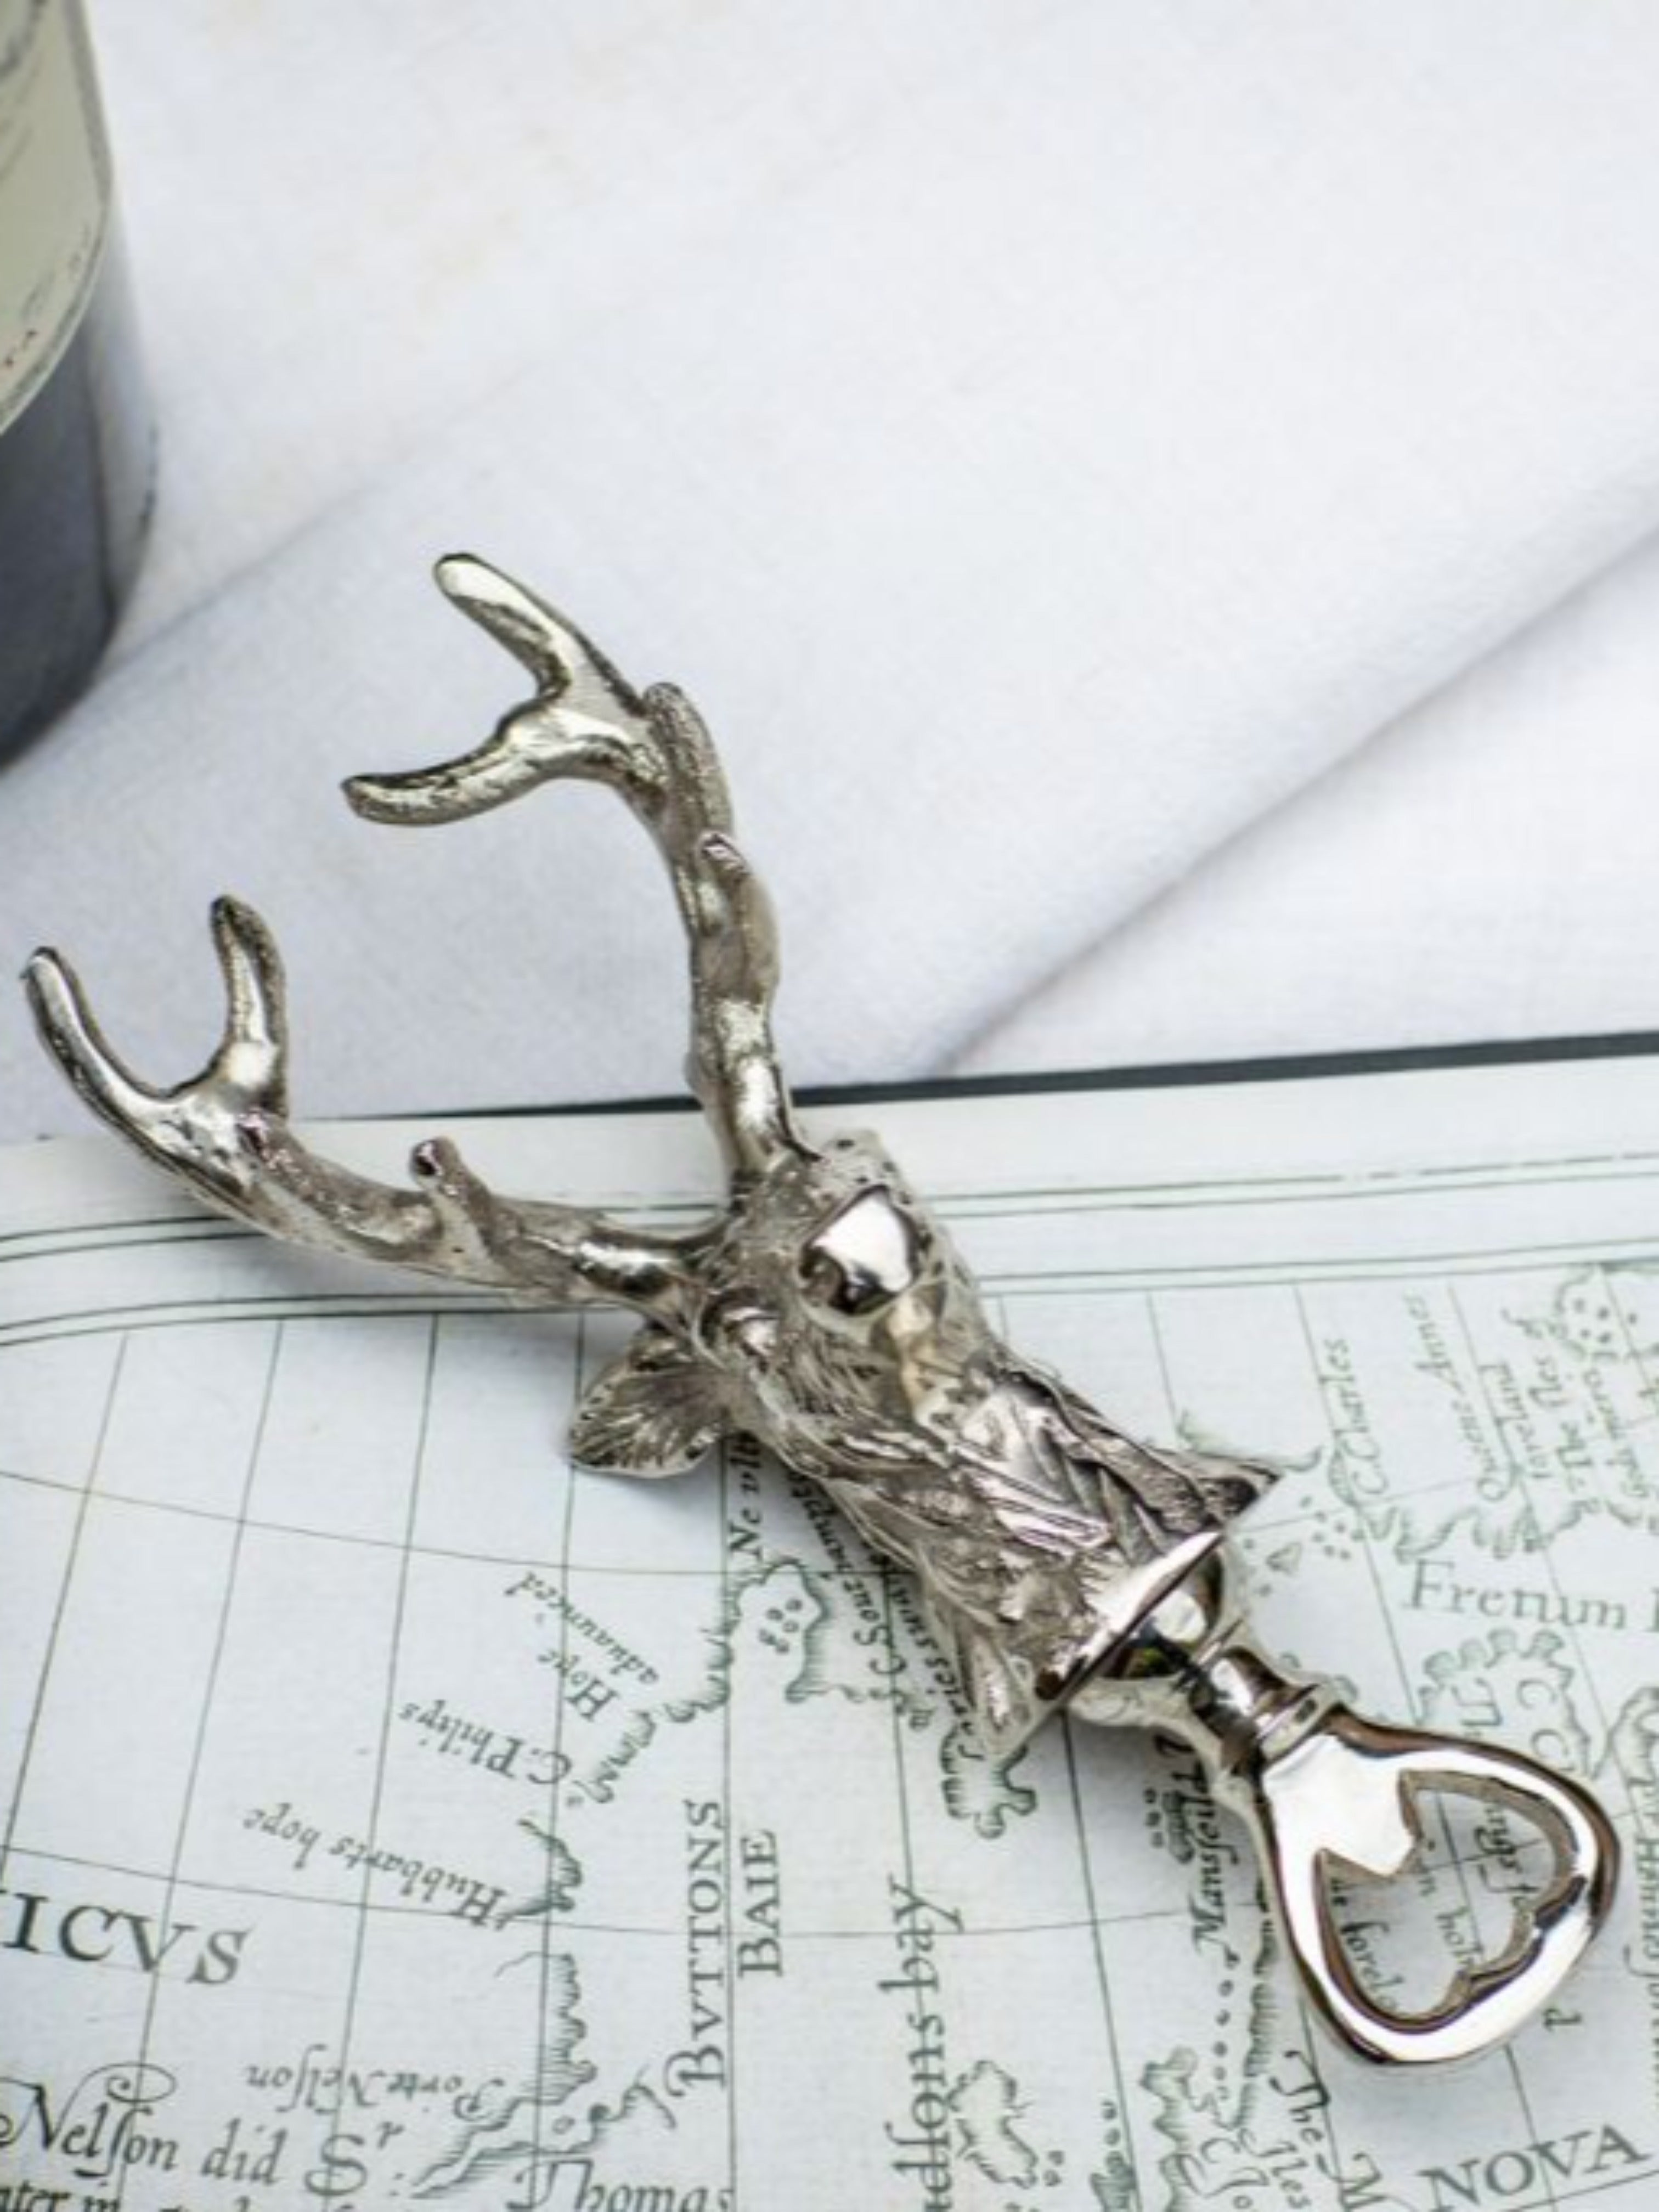 Culinary Concepts Silver Stag Bottle Opener